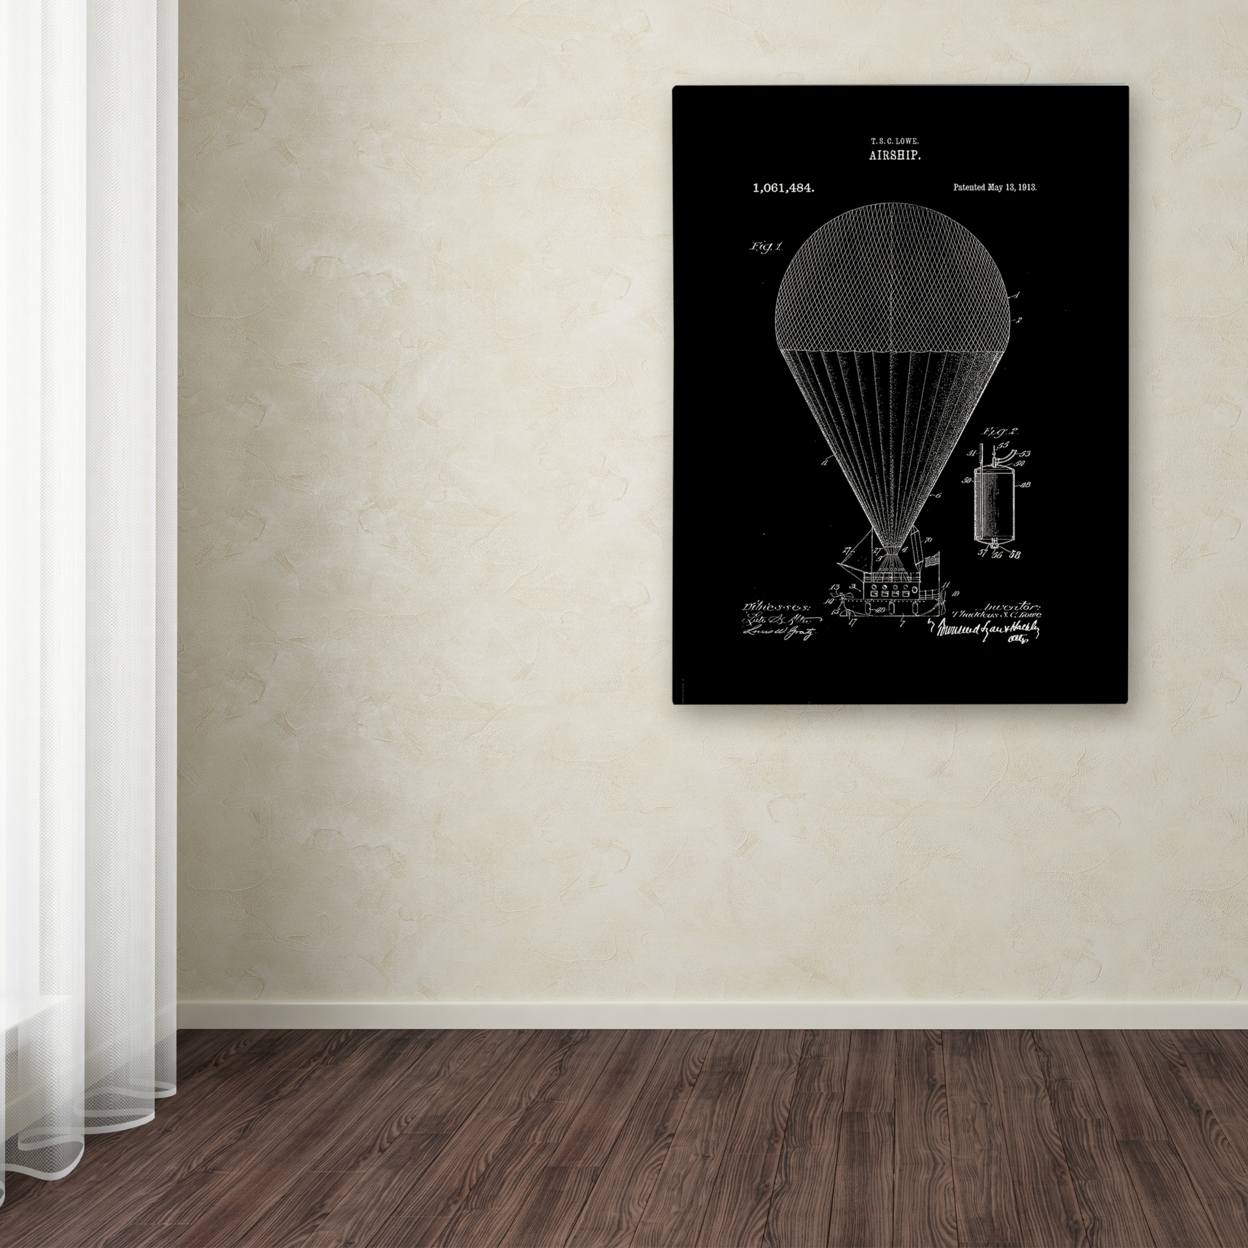 Claire Doherty 'Airship Patent 1913 Black' Canvas Wall Art 35 X 47 Inches